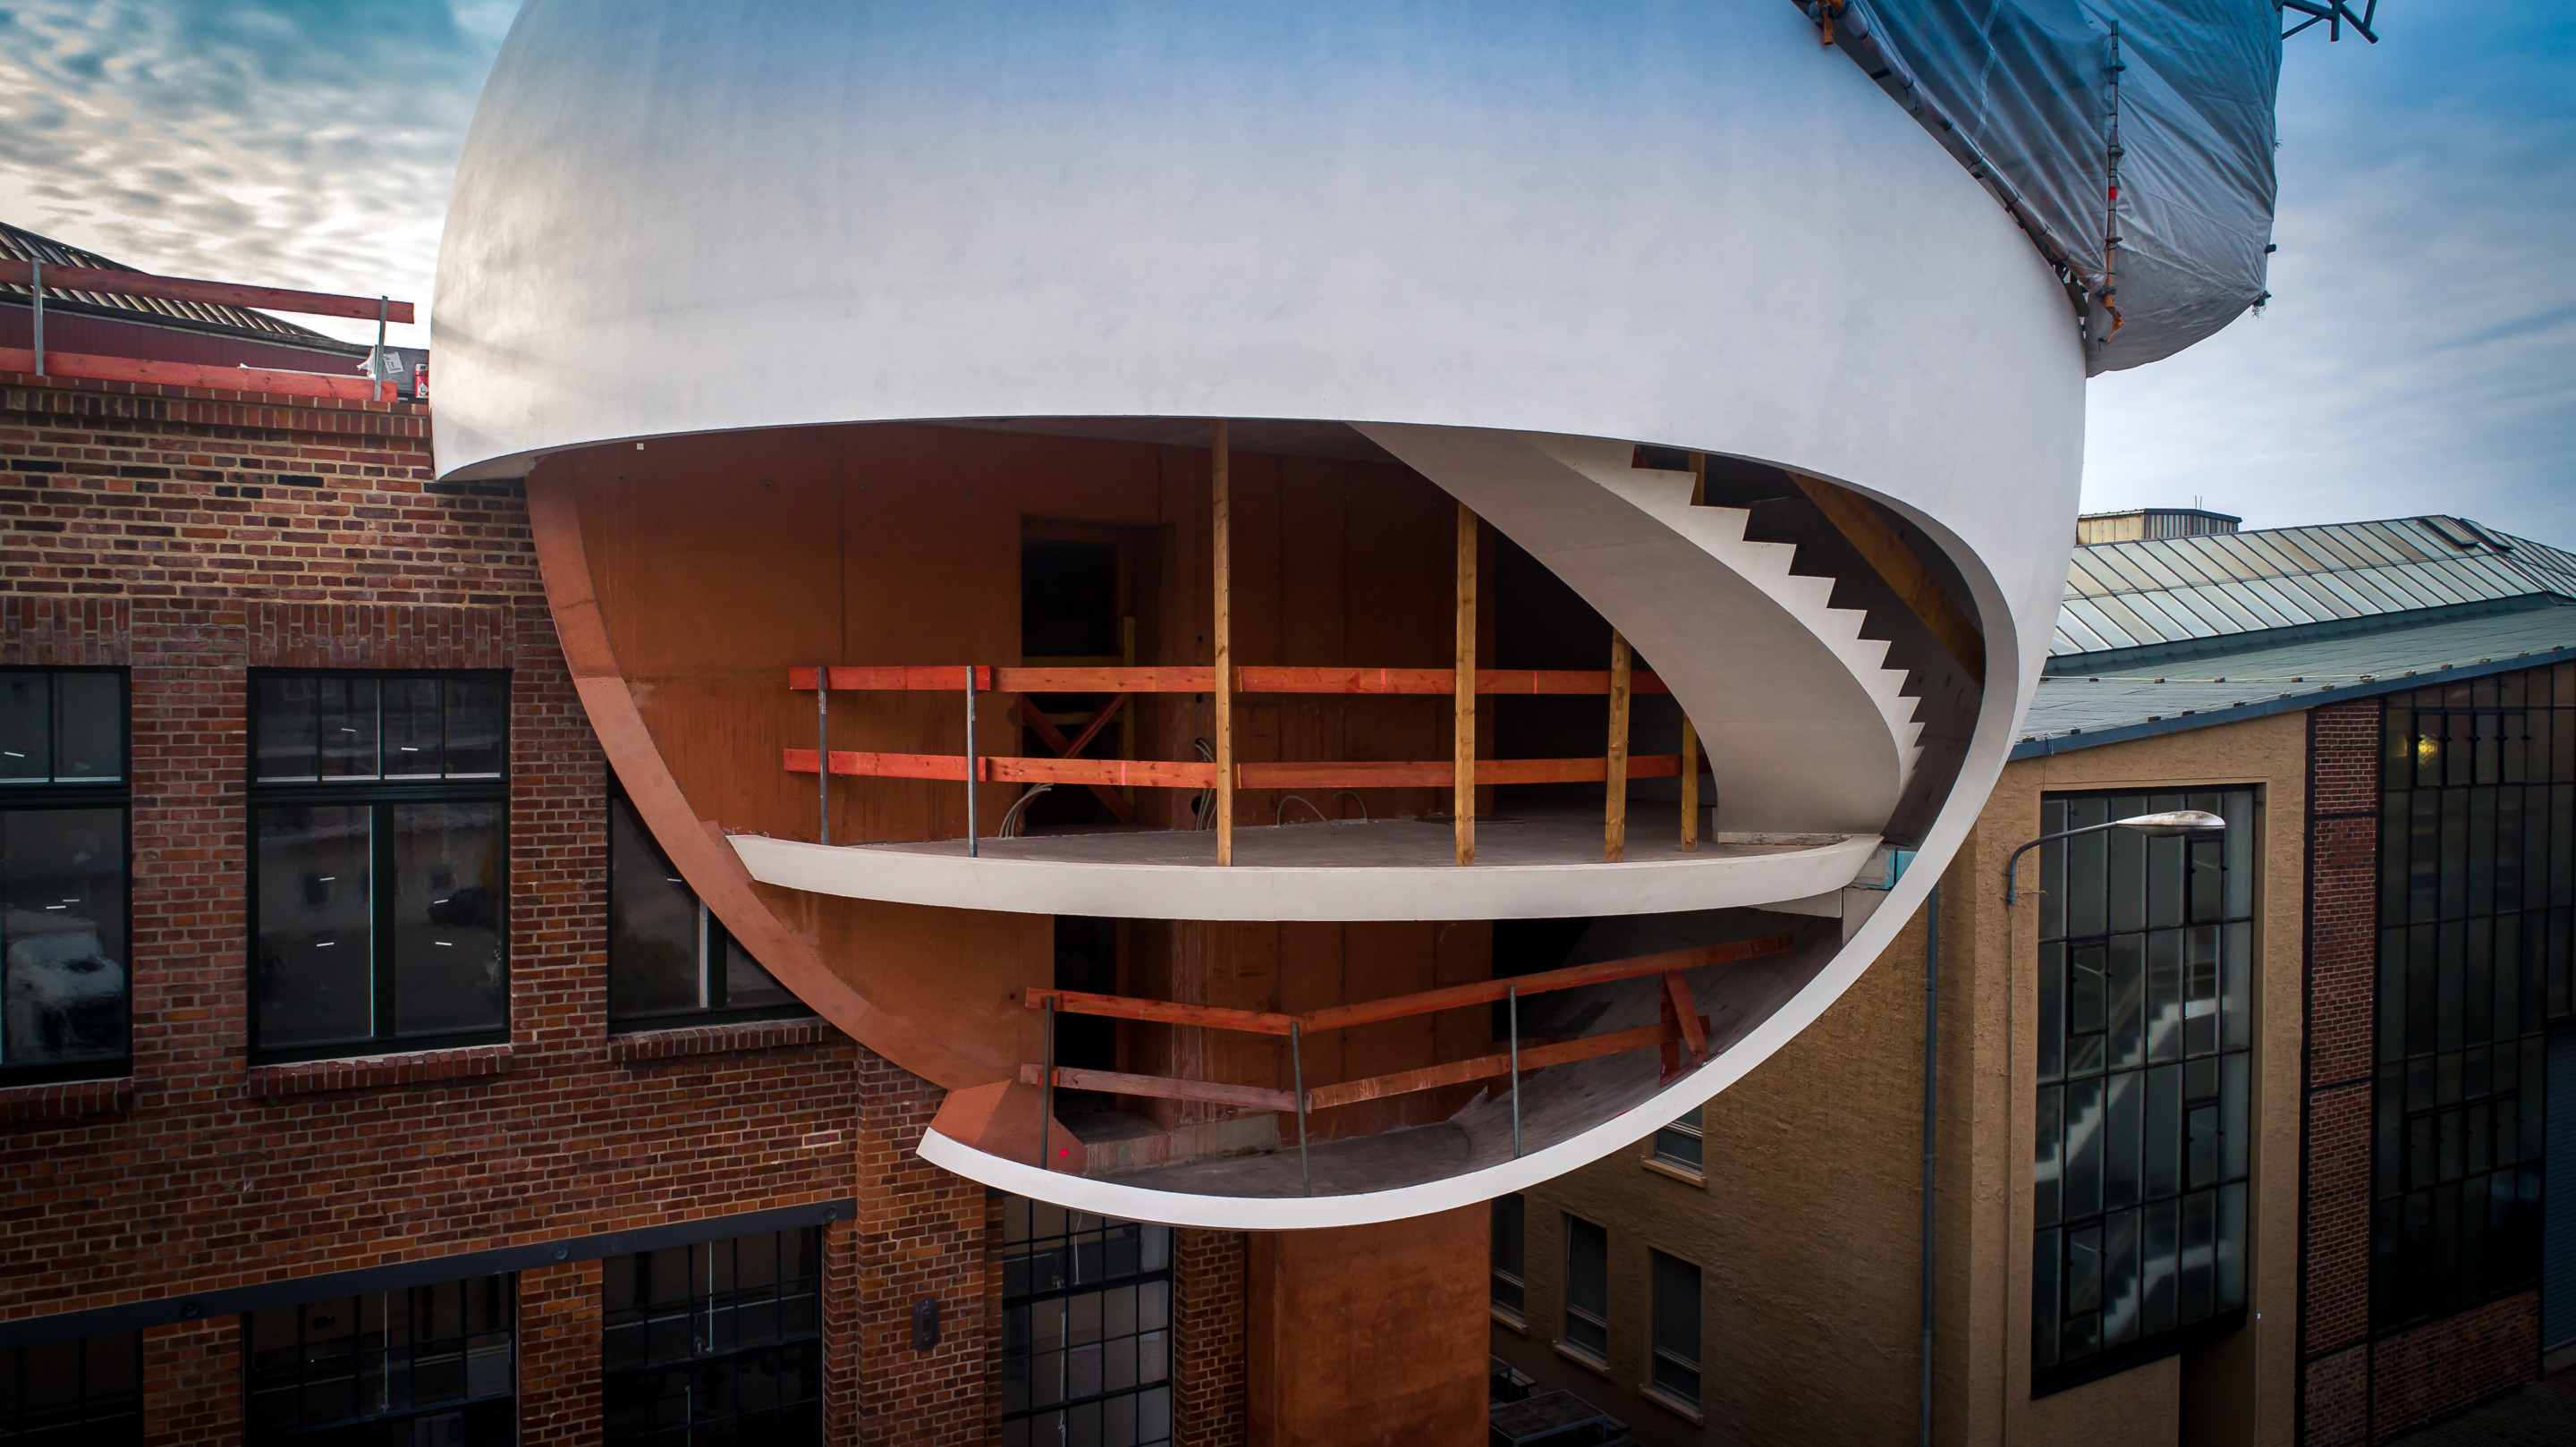 a spherical addition to a building under construction